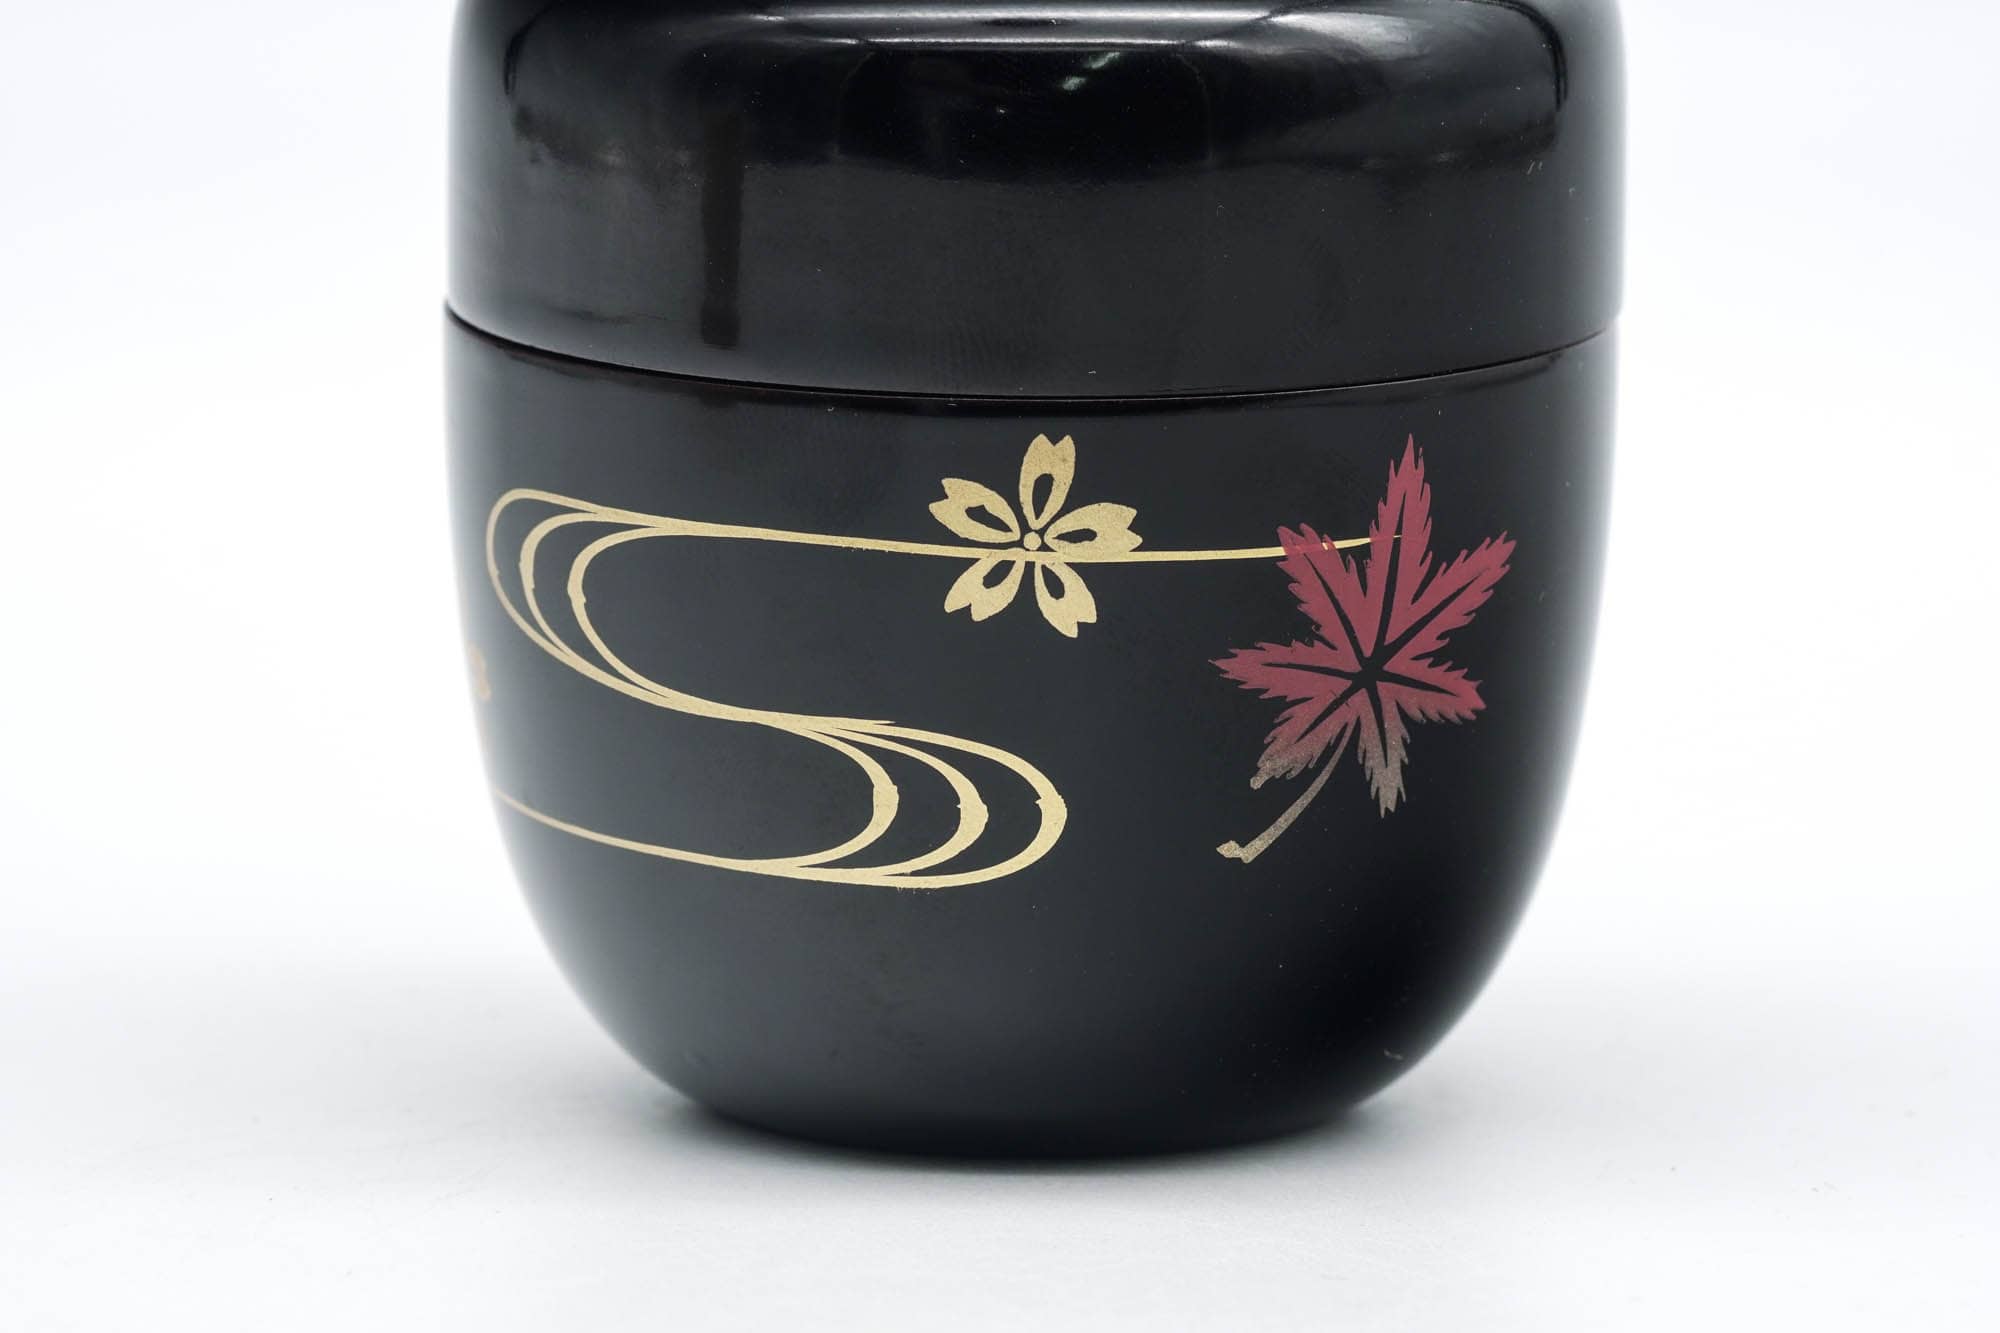 Japanese Canister - Autumn Leaves Black Lacquer Matcha Tea Caddy - 100ml